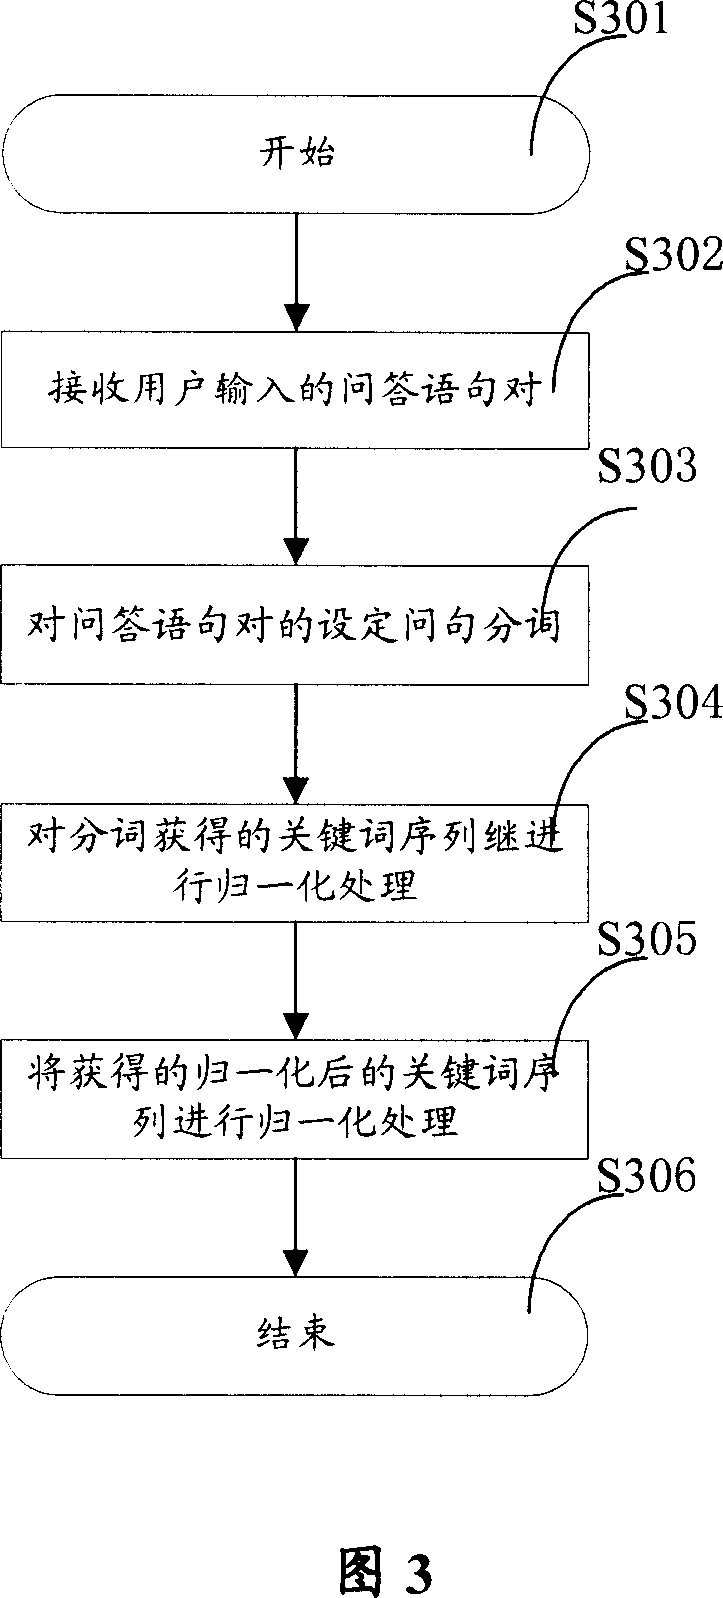 Automatically request-answering system and method